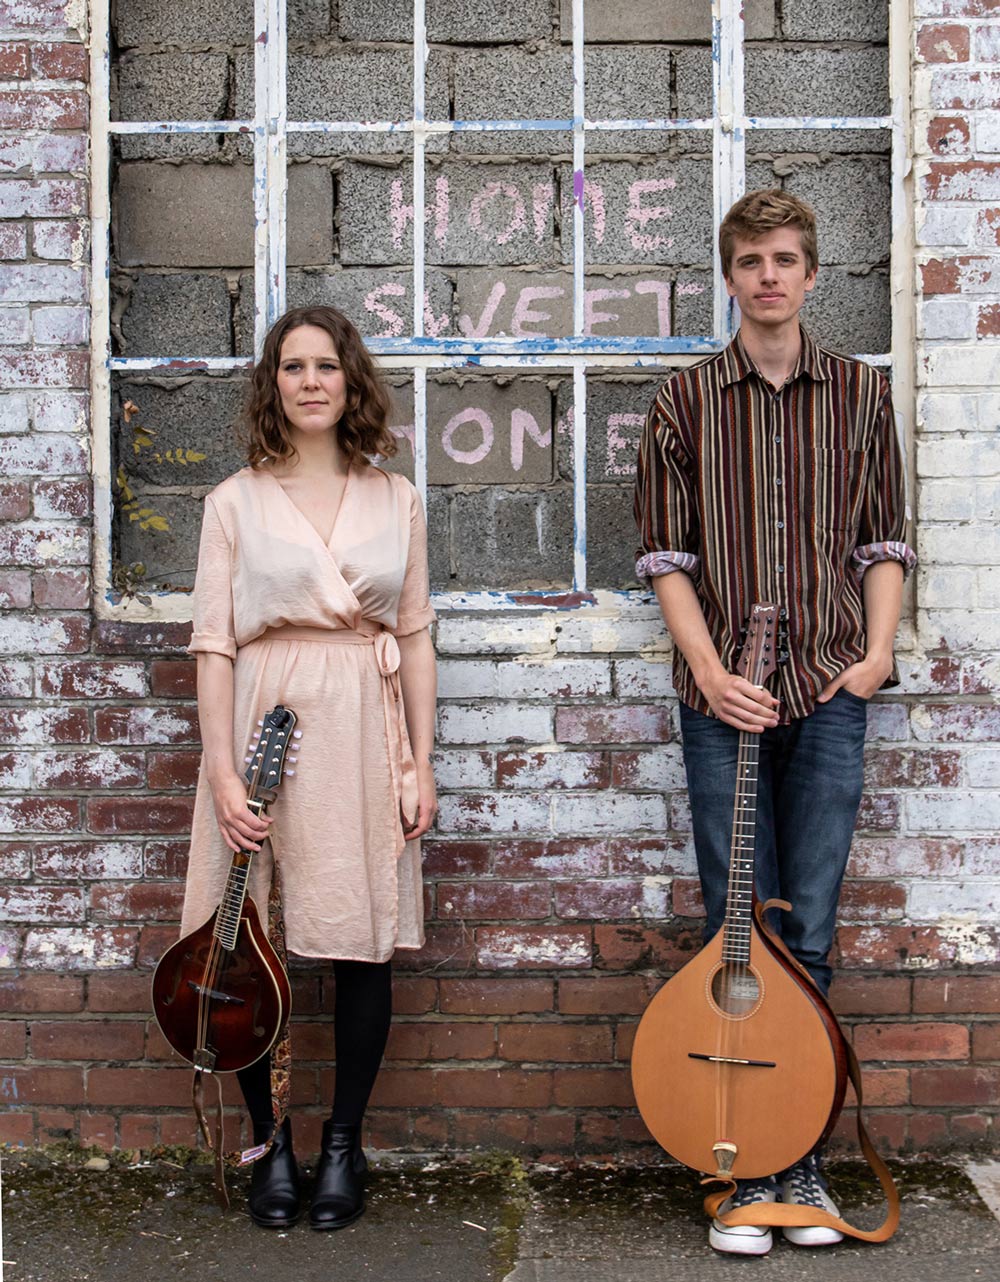 Anglo-Scottish duo Janice Burns and Jon Doran released No More the Green Hills in the autumn last year